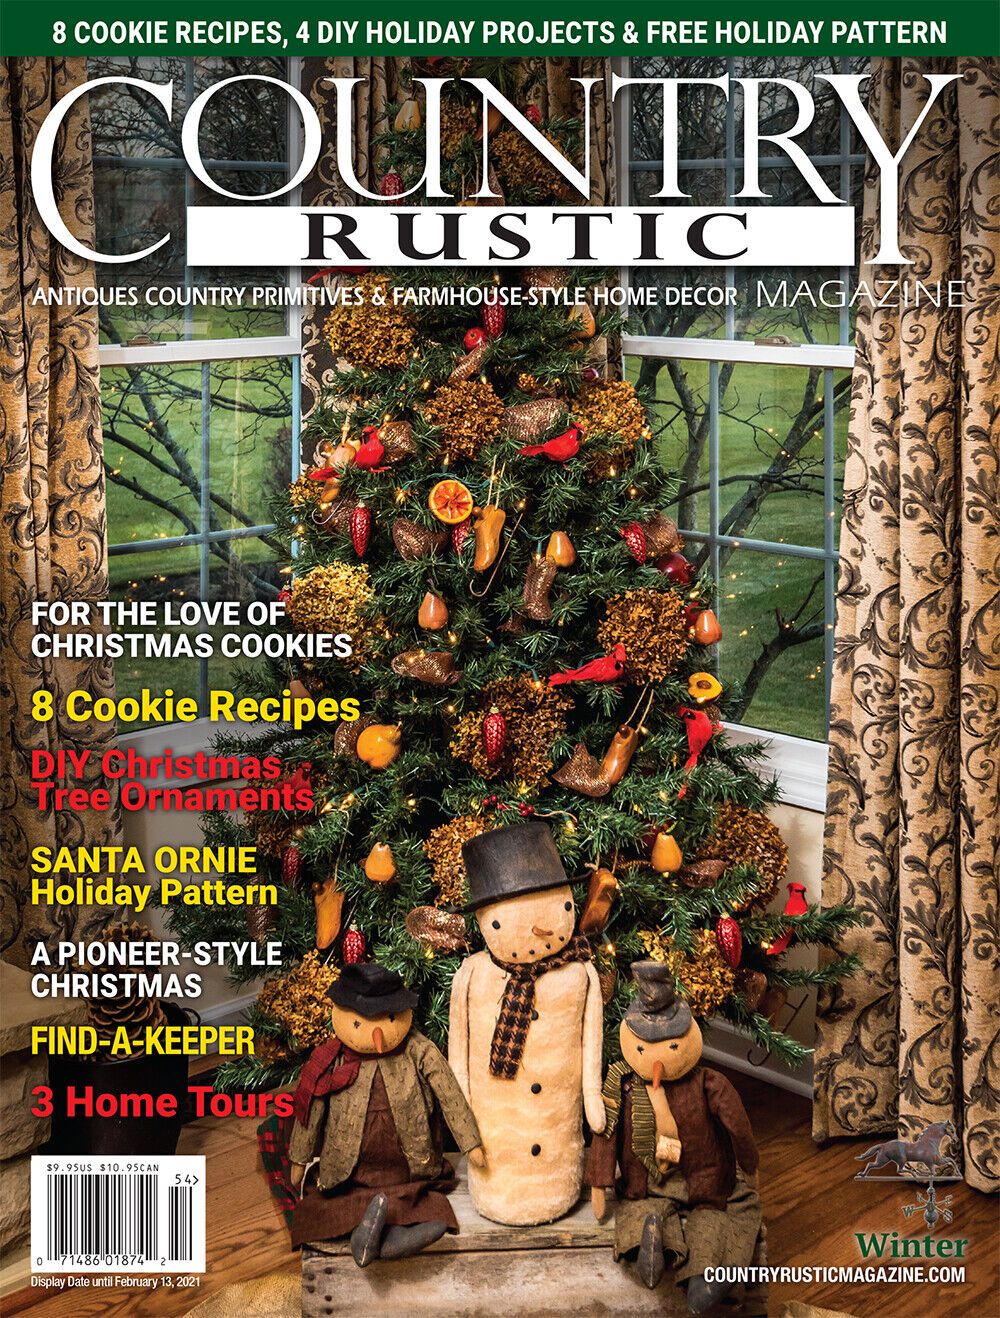 Country Rustic Magazine WINTER 2020 Issue ~ Country Primitives & Farmhouse-Style